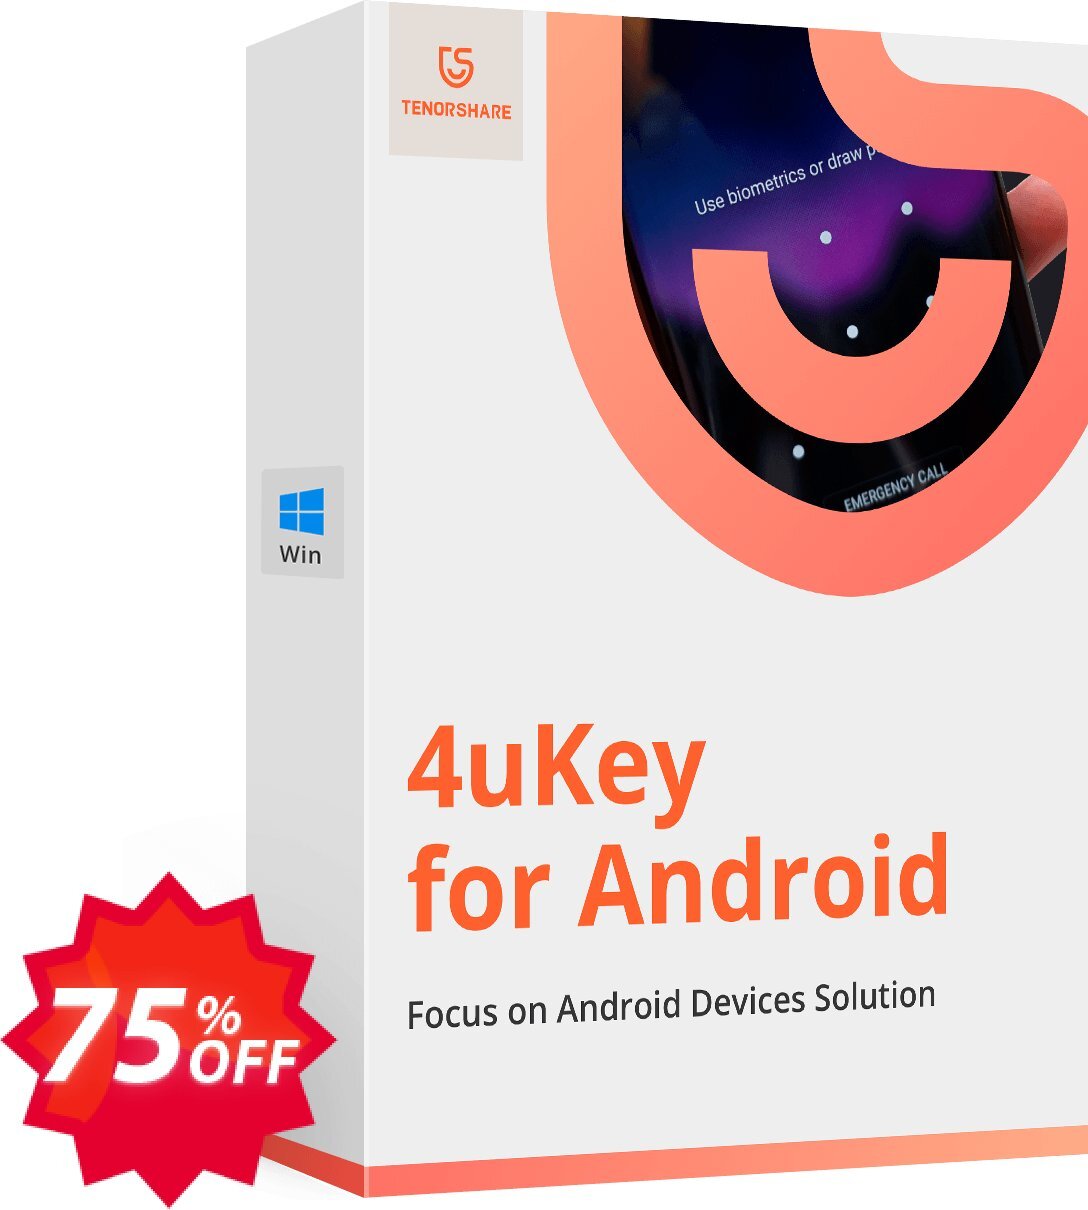 Tenorshare 4uKey for Android, MAC, Monthly Plan  Coupon code 75% discount 